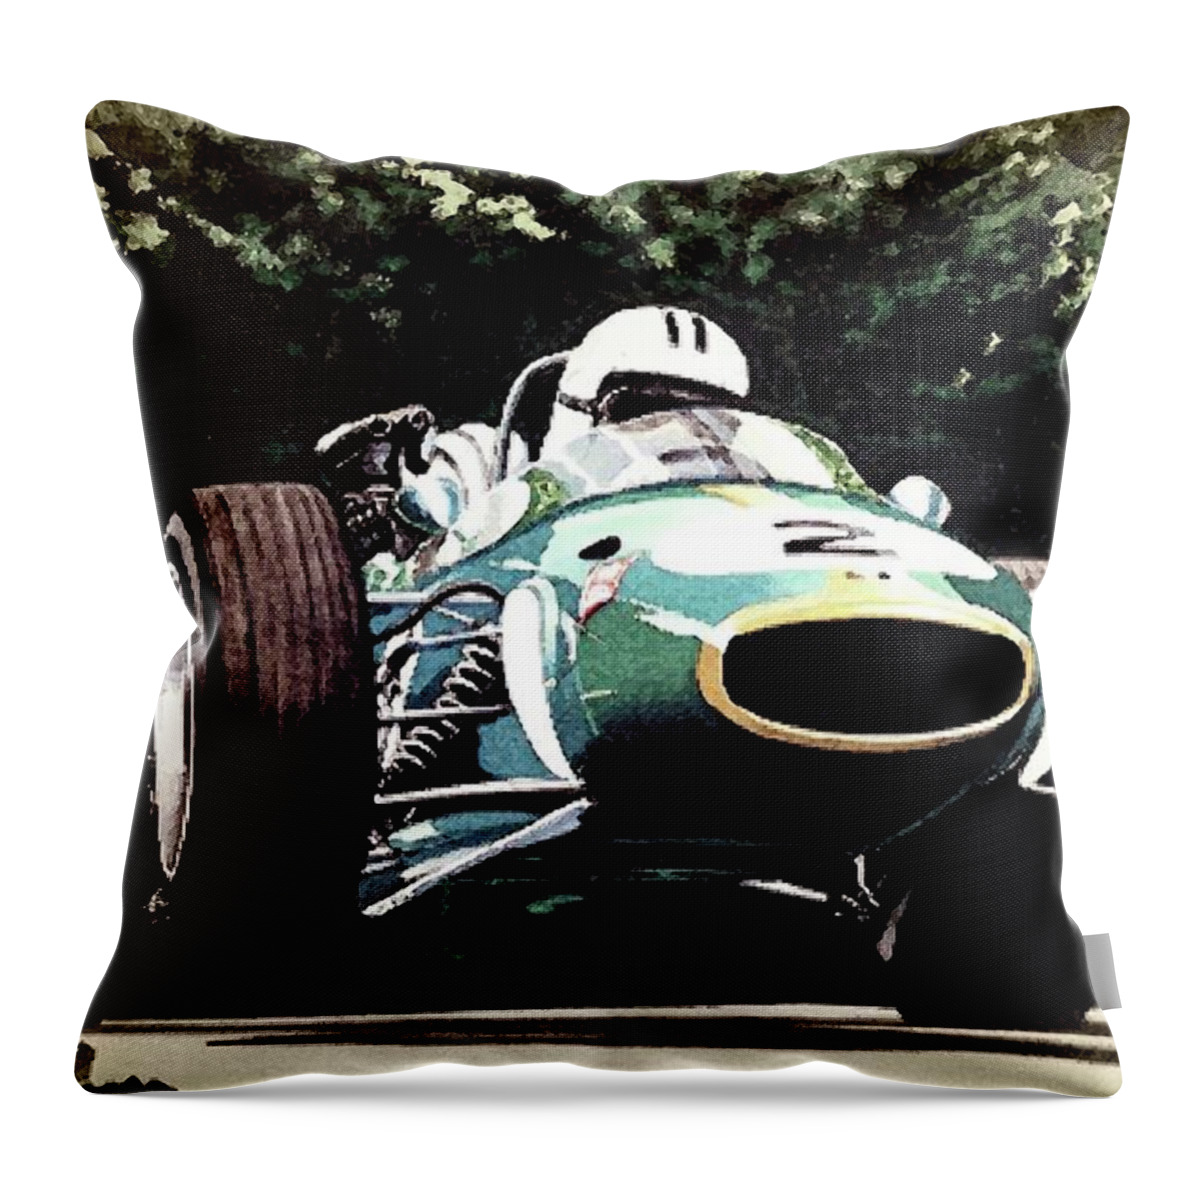 Denny Hulme Throw Pillow featuring the painting Denny Hulme by Simon Read